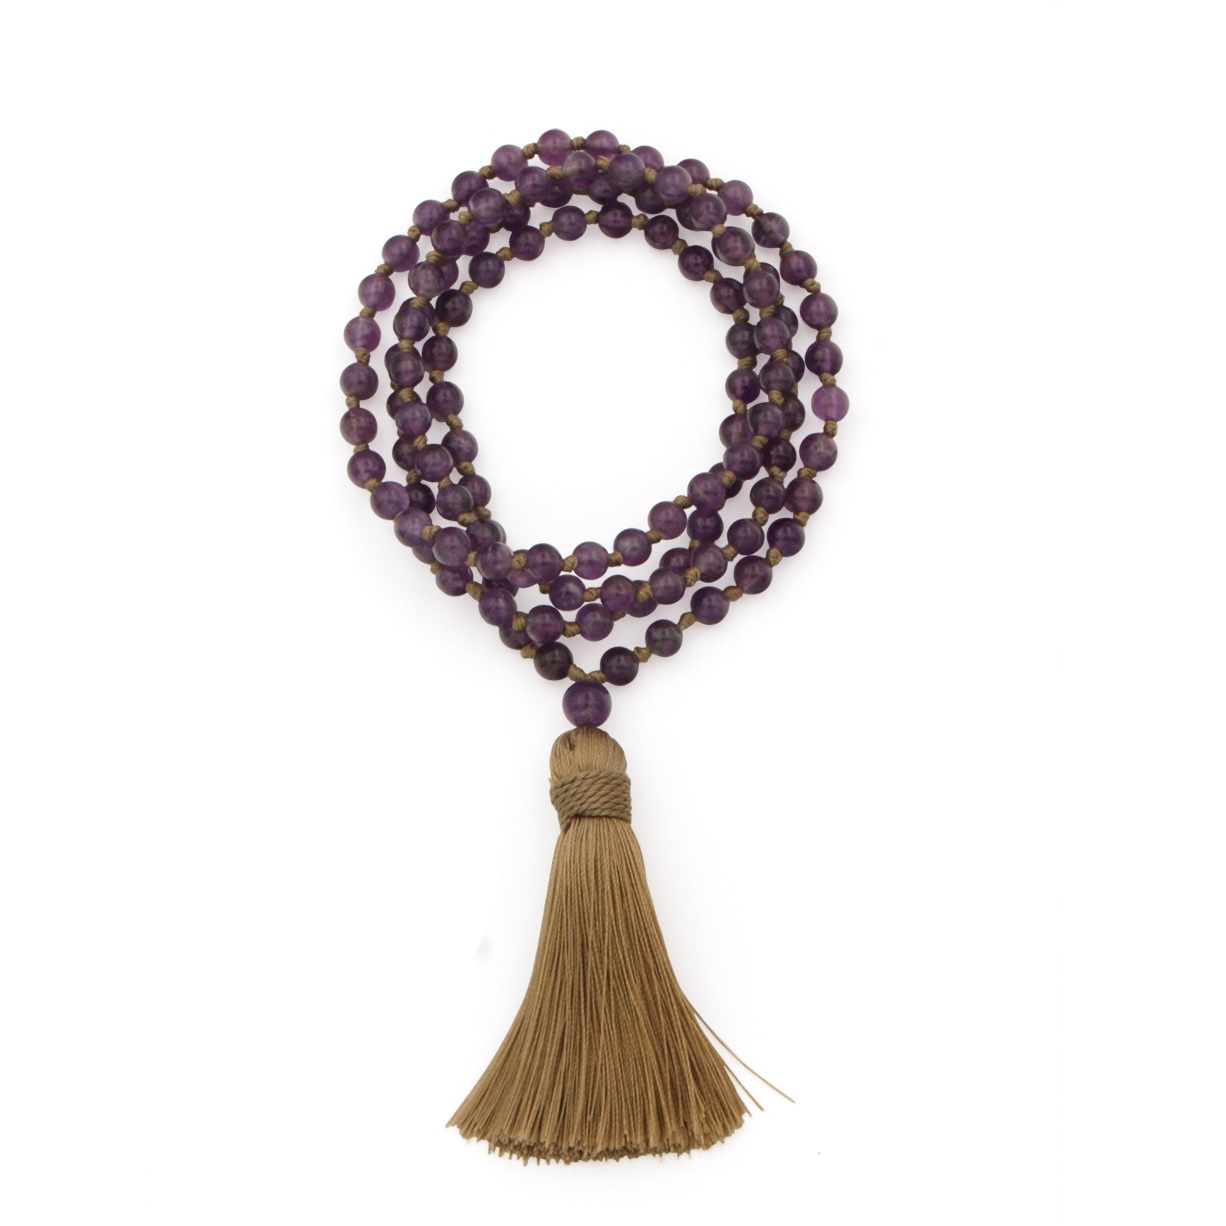 Online Shop Of 108 Beads Amethyst Beaded Mala Necklace